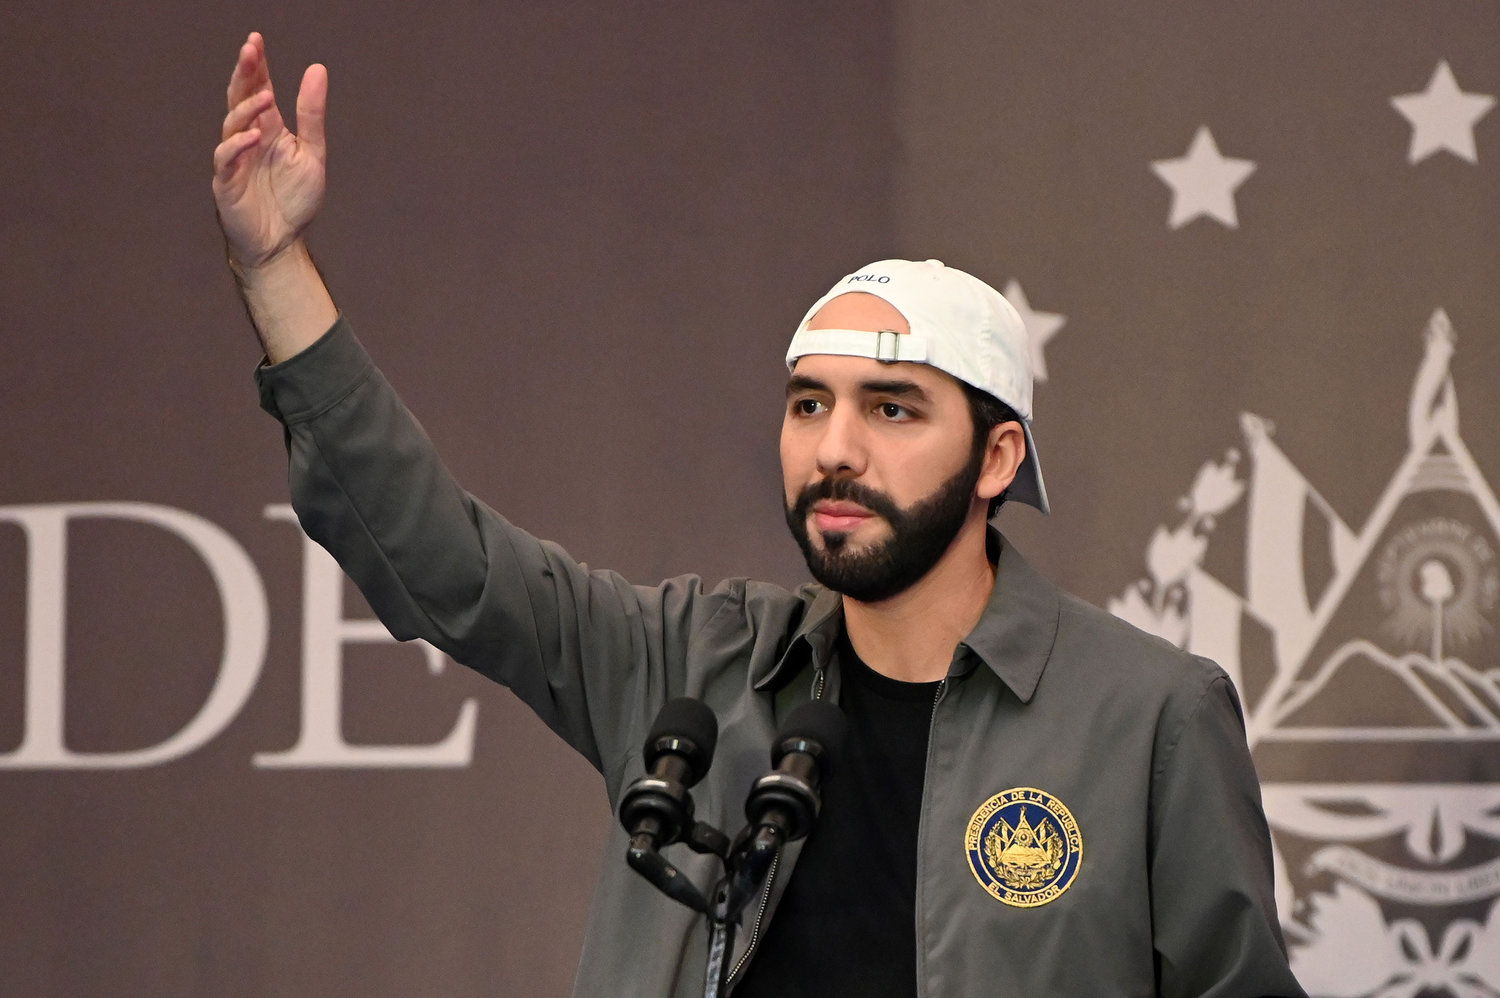 Salvadoran President Nayib Bukele delivers a press conference at a hotel in San Salvador on Feb. 28, 2021. (Stanley Estrada/AFP/Getty Images/TNS)